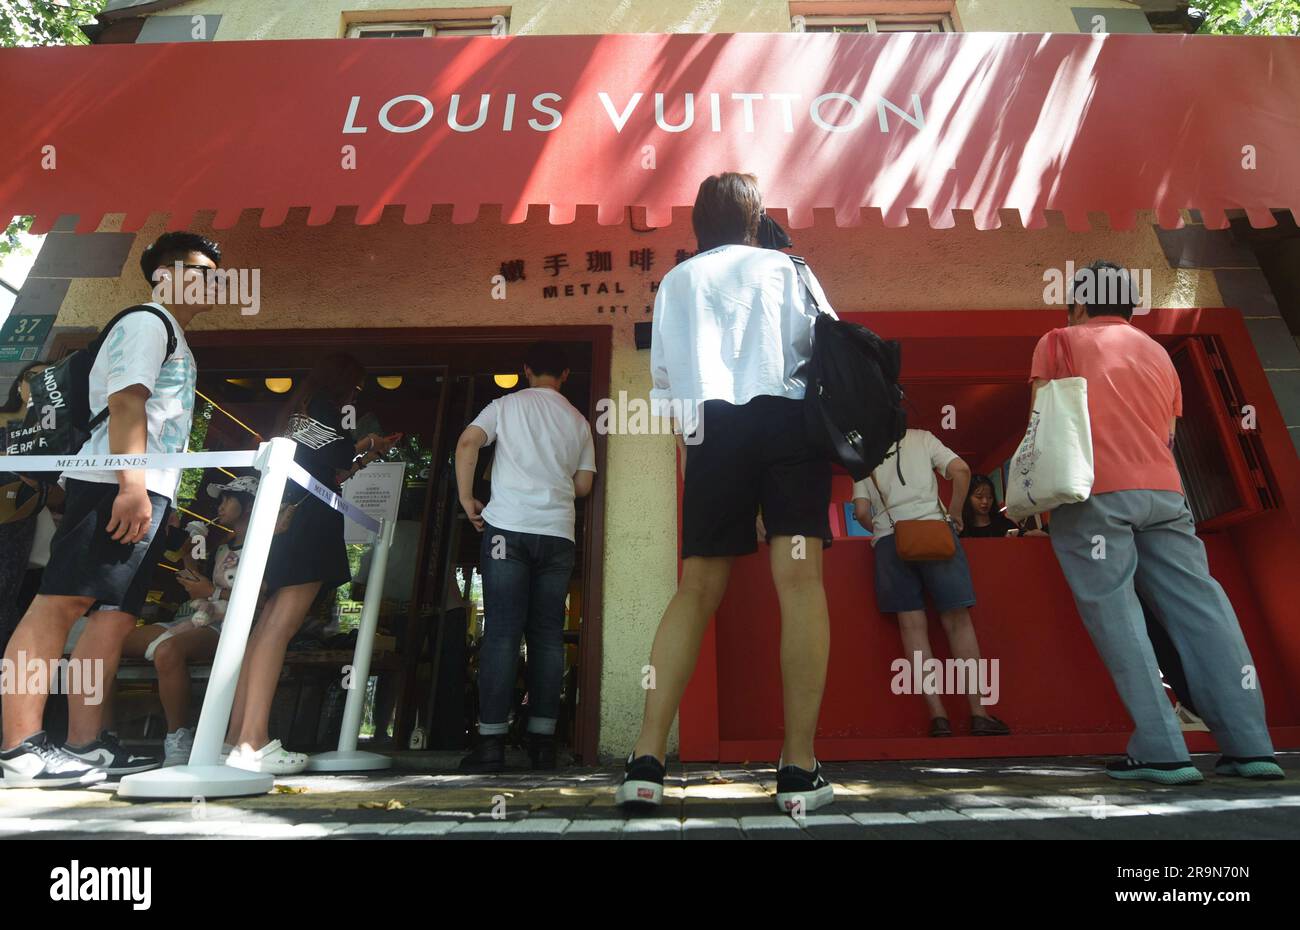 SHANGHAI, CHINA - JUNE 28, 2023 - People line up to buy Louis Vuitton coffee  and canvas bags with Louis Vuitton LOGO at a Louis Vuitton coffee shop in  Stock Photo - Alamy